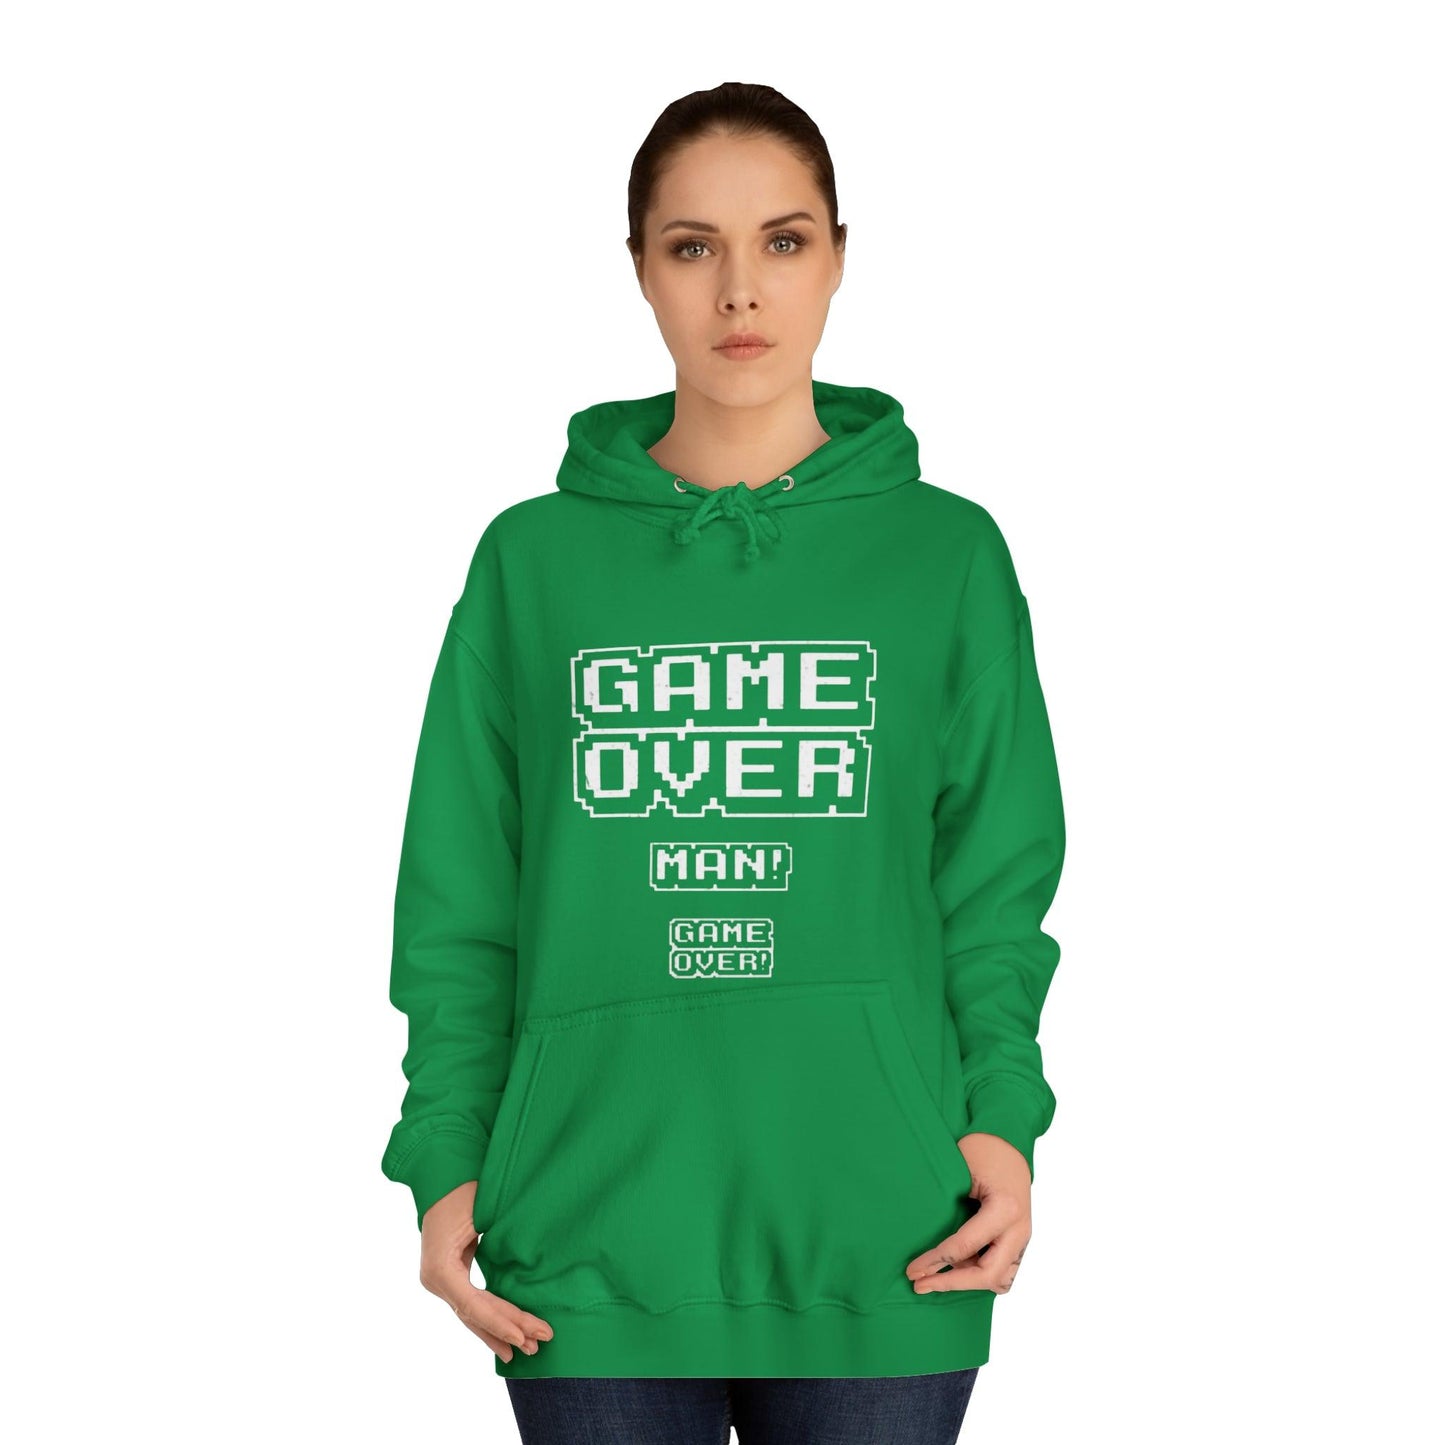 The Best Hoodie for Online Gaming Enthusiasts - Ultimate Game Wear